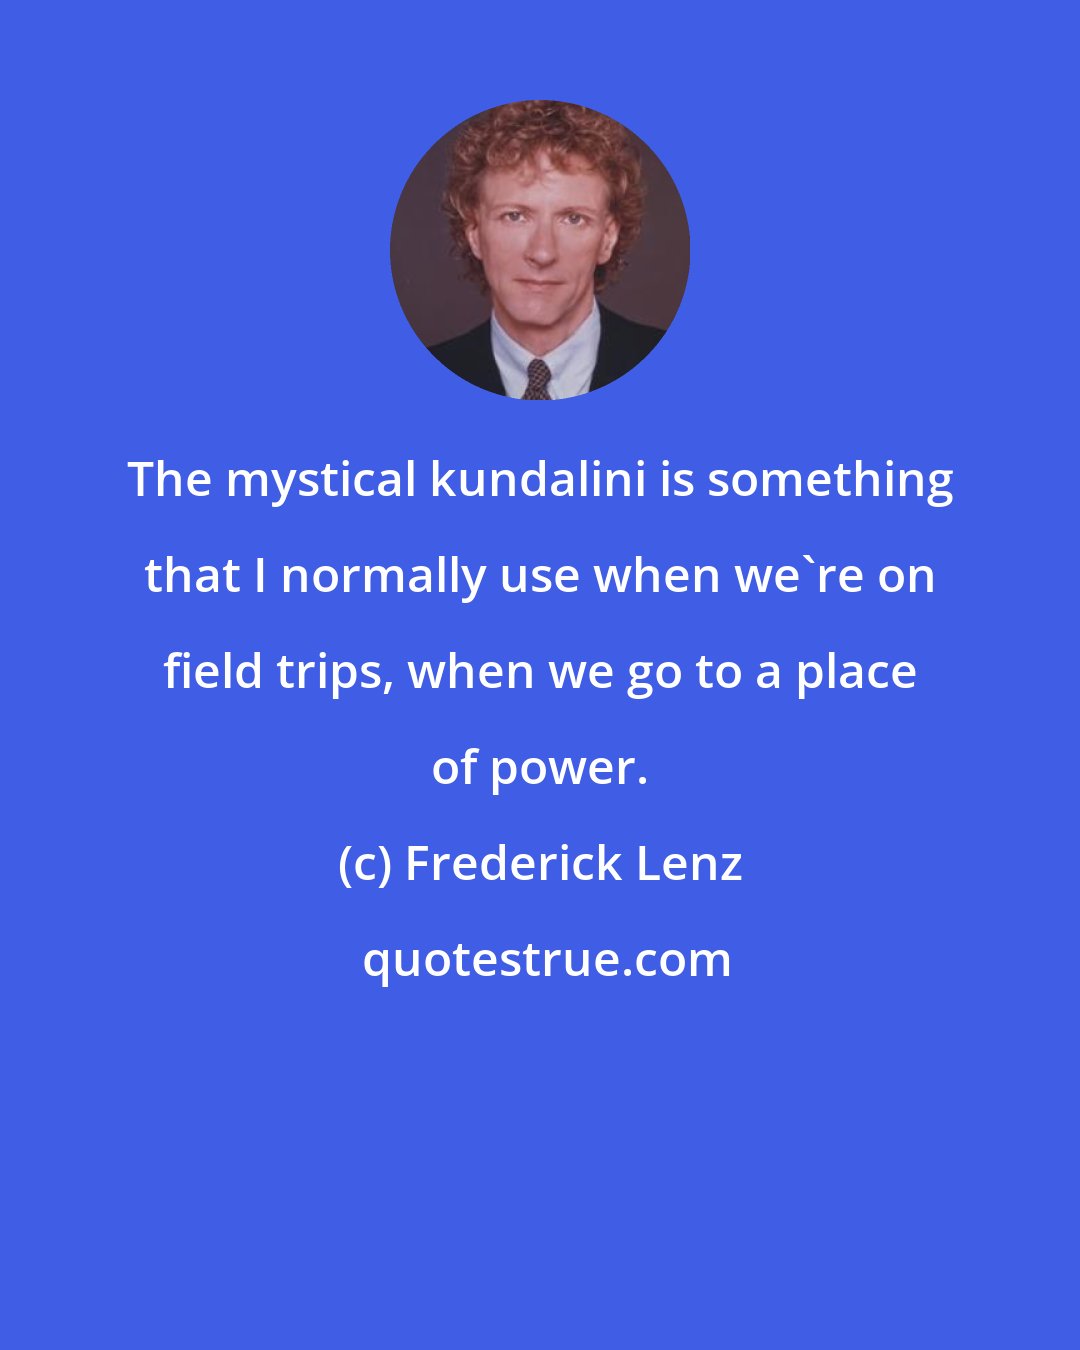 Frederick Lenz: The mystical kundalini is something that I normally use when we're on field trips, when we go to a place of power.